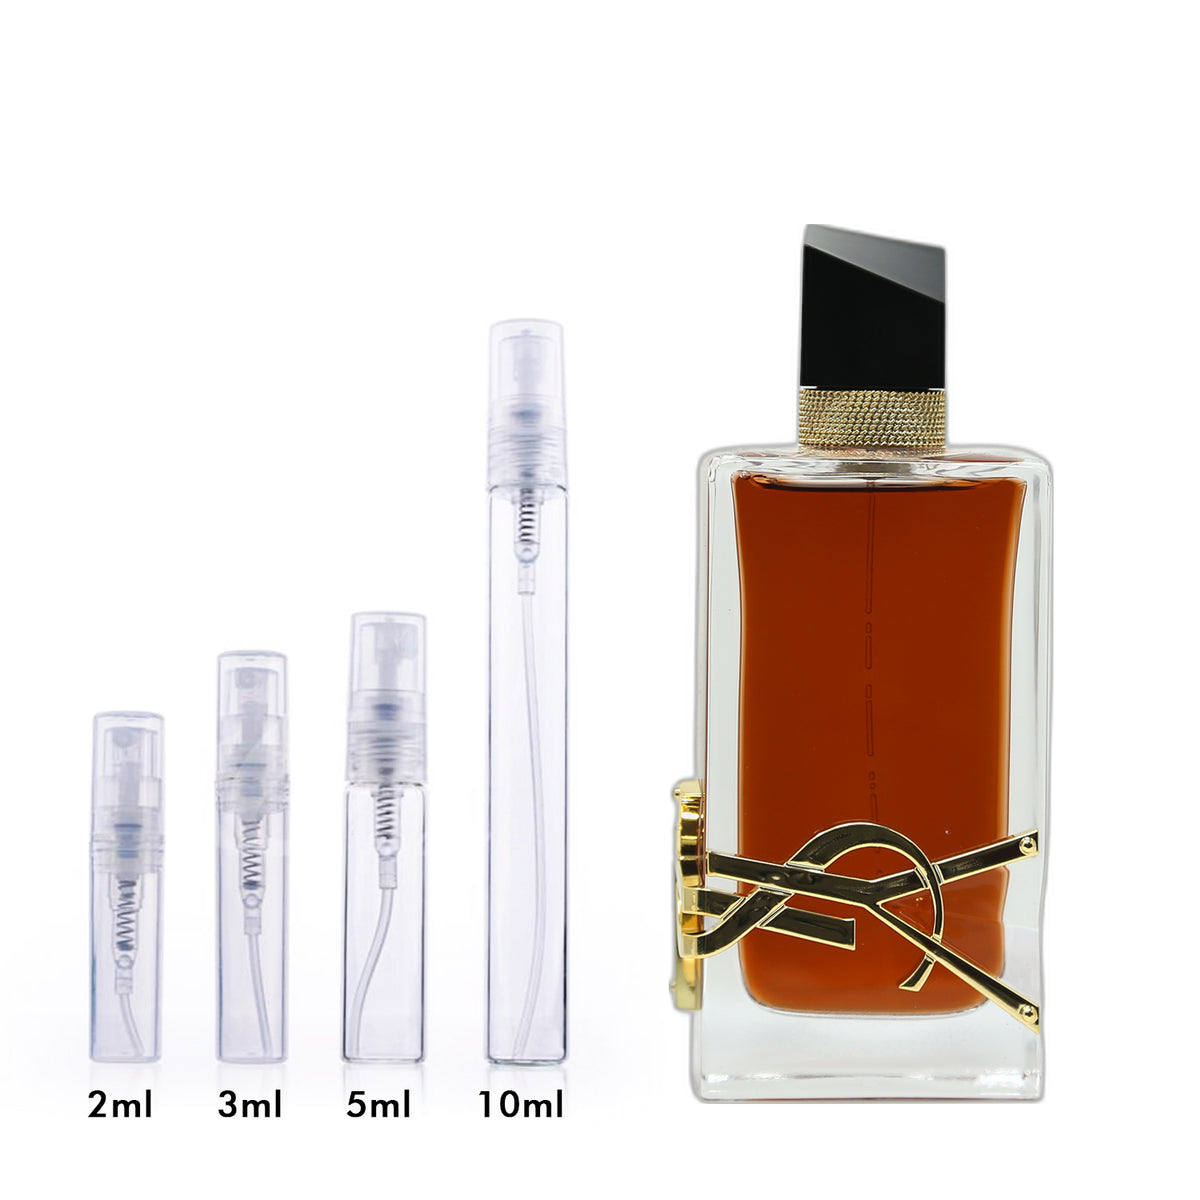 Shop for samples of Libre Le Parfum (Parfum) by Yves Saint Laurent for  women rebottled and repacked by